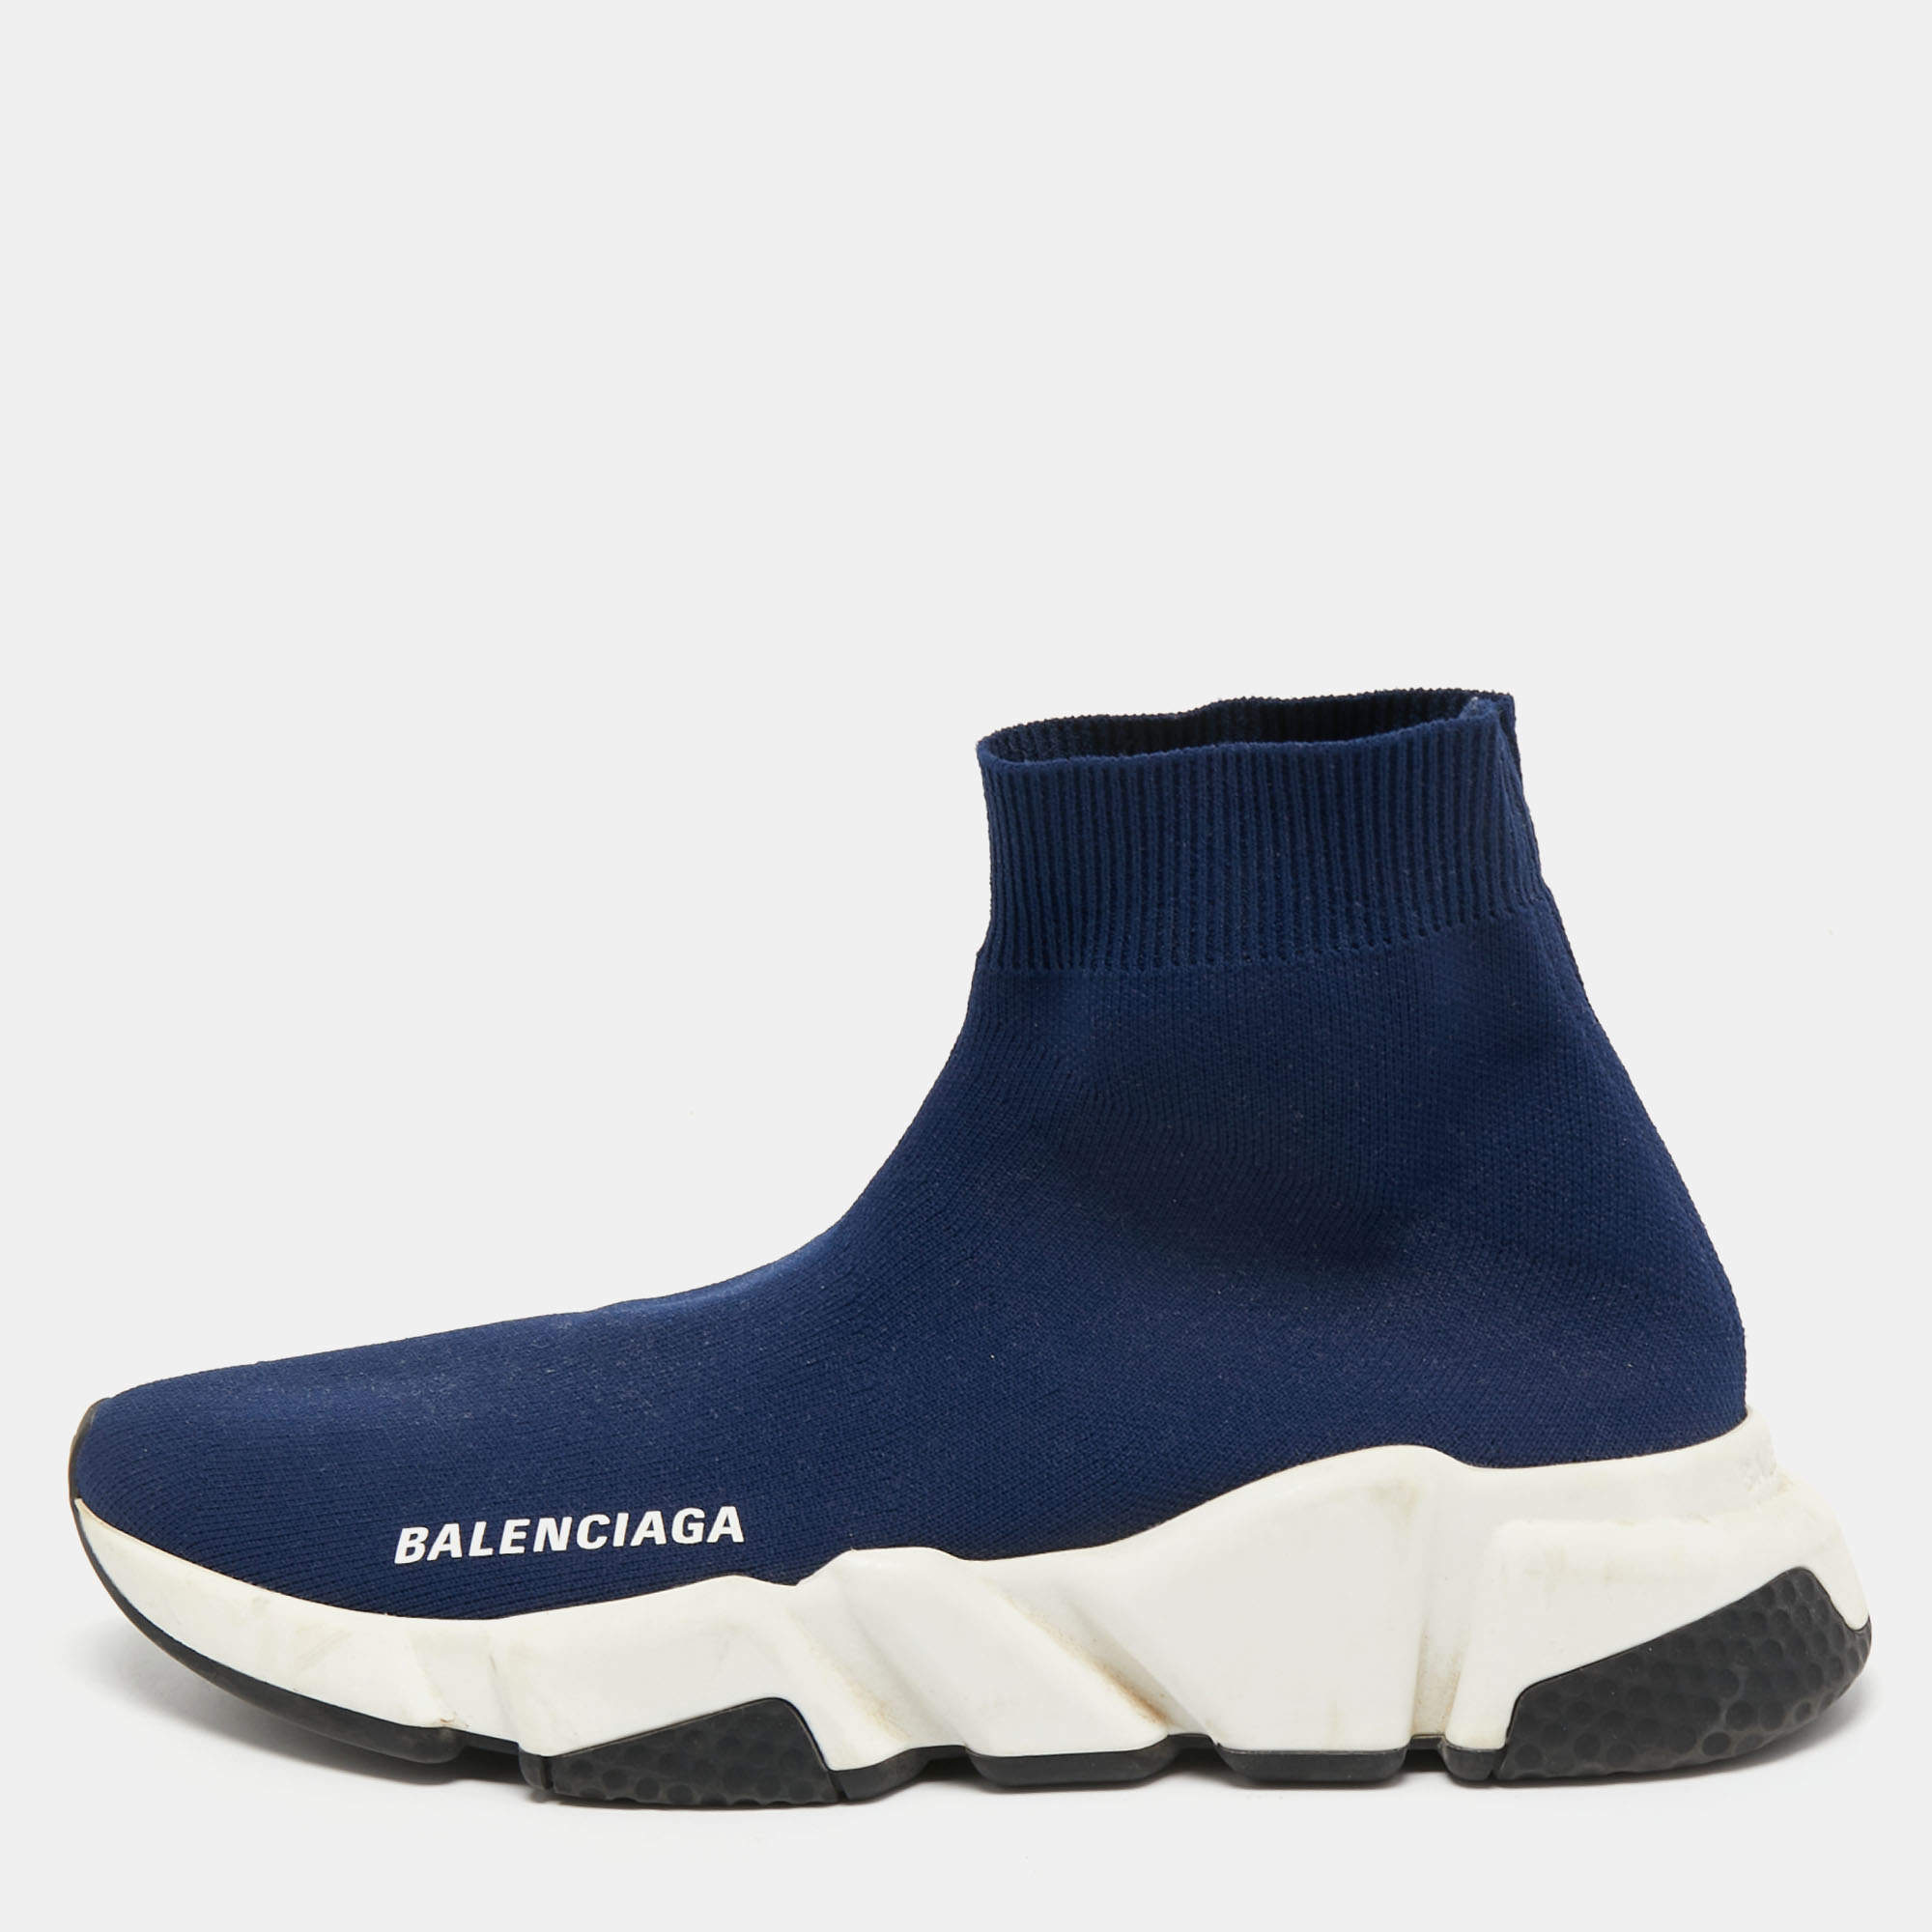 balenciaga triple s size 45 Color Navy Blue 100  Message Me Any  Question  eBay